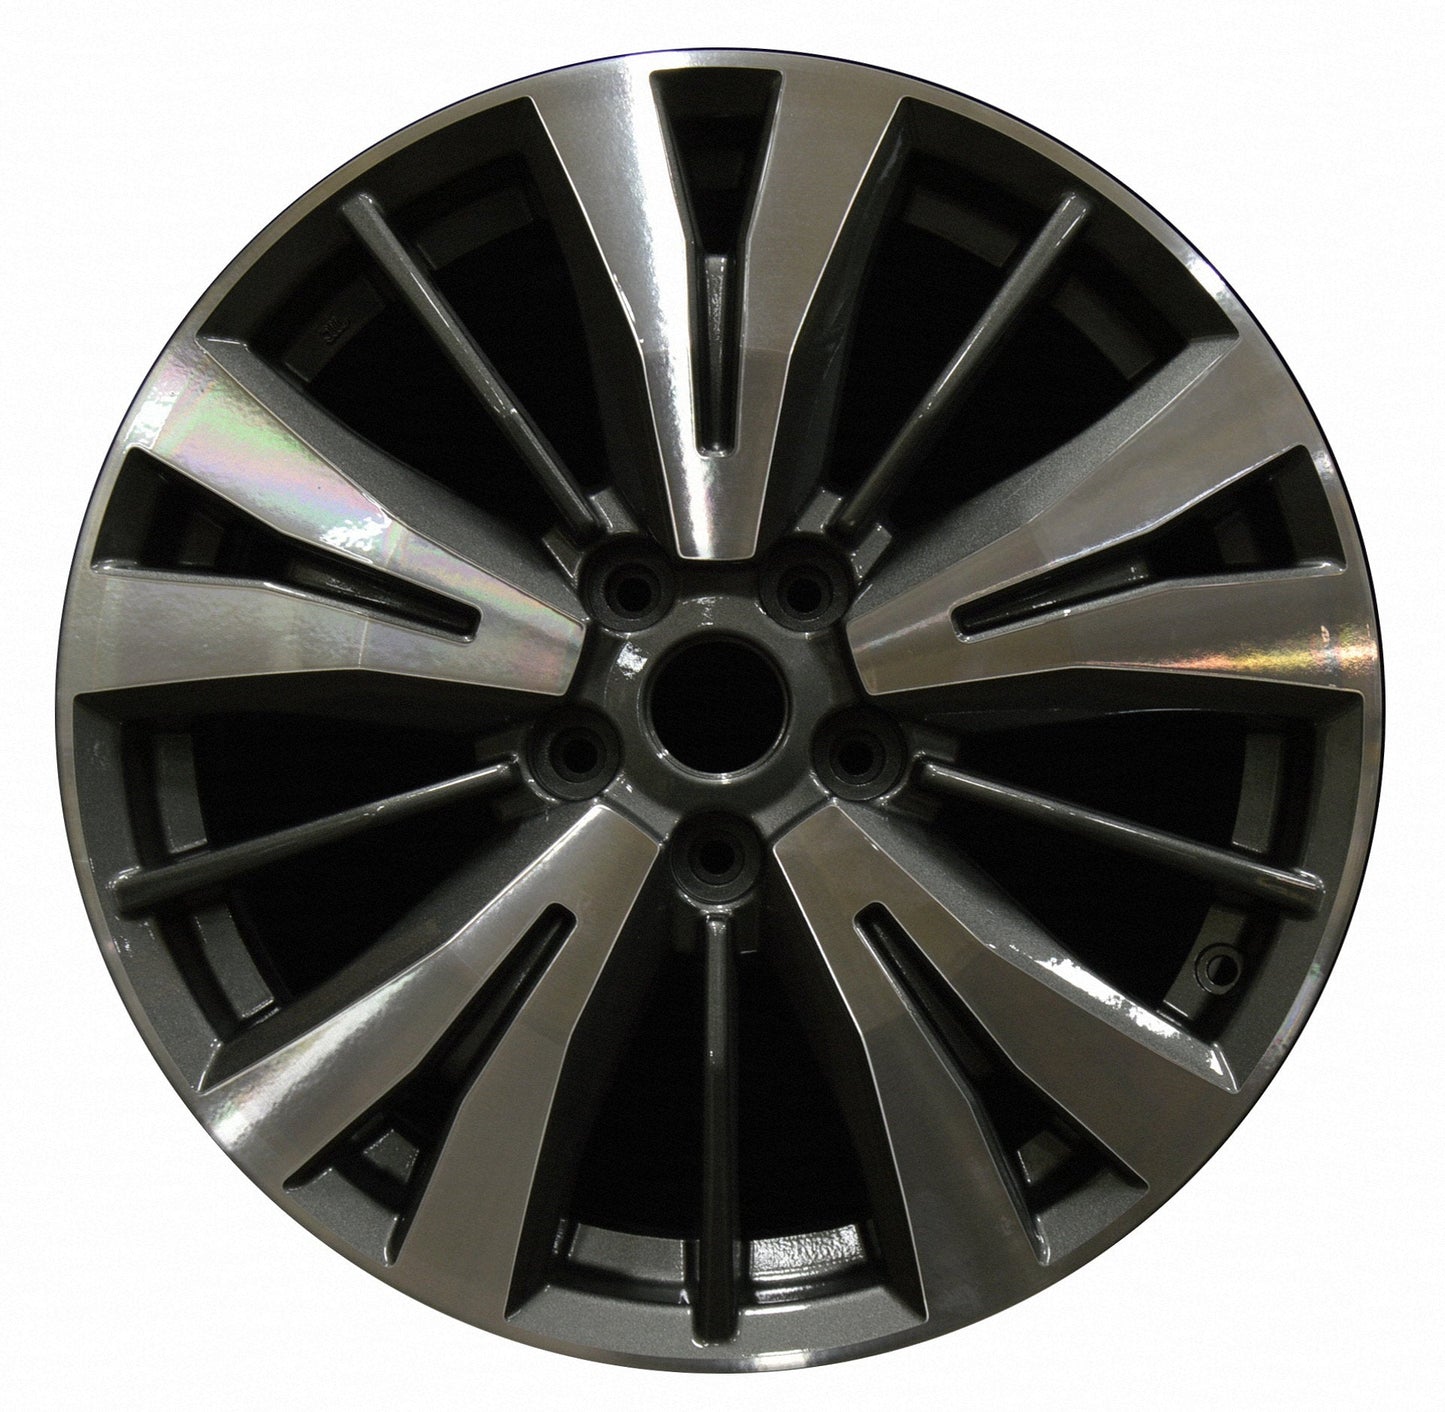 Nissan Pathfinder  2017, 2018, 2019, 2020 Factory OEM Car Wheel Size 18x7.5 Alloy WAO.62742.LC46.MABRT